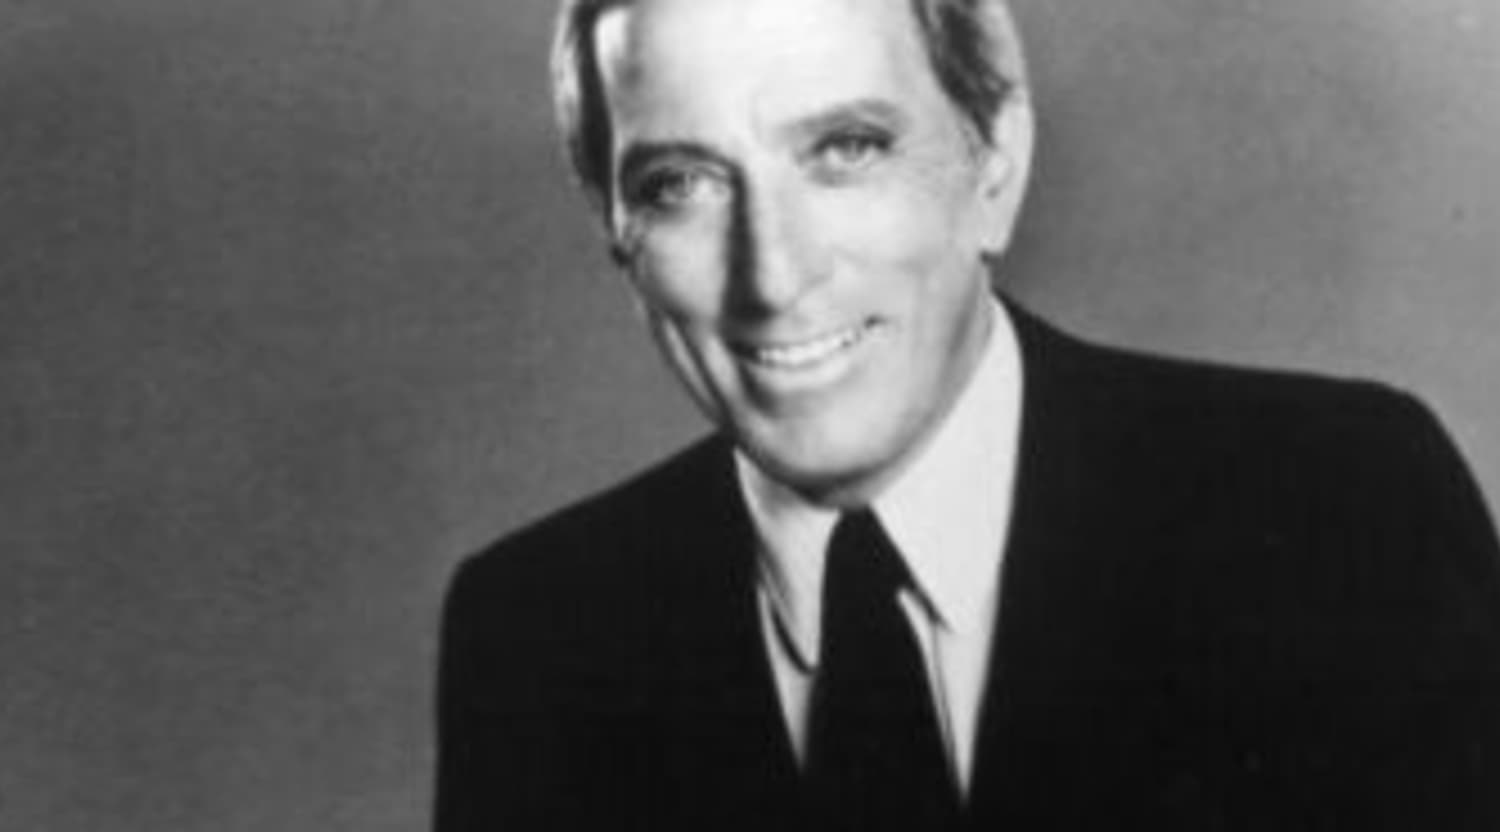 Andy Williams Moon River Theater Seating Chart